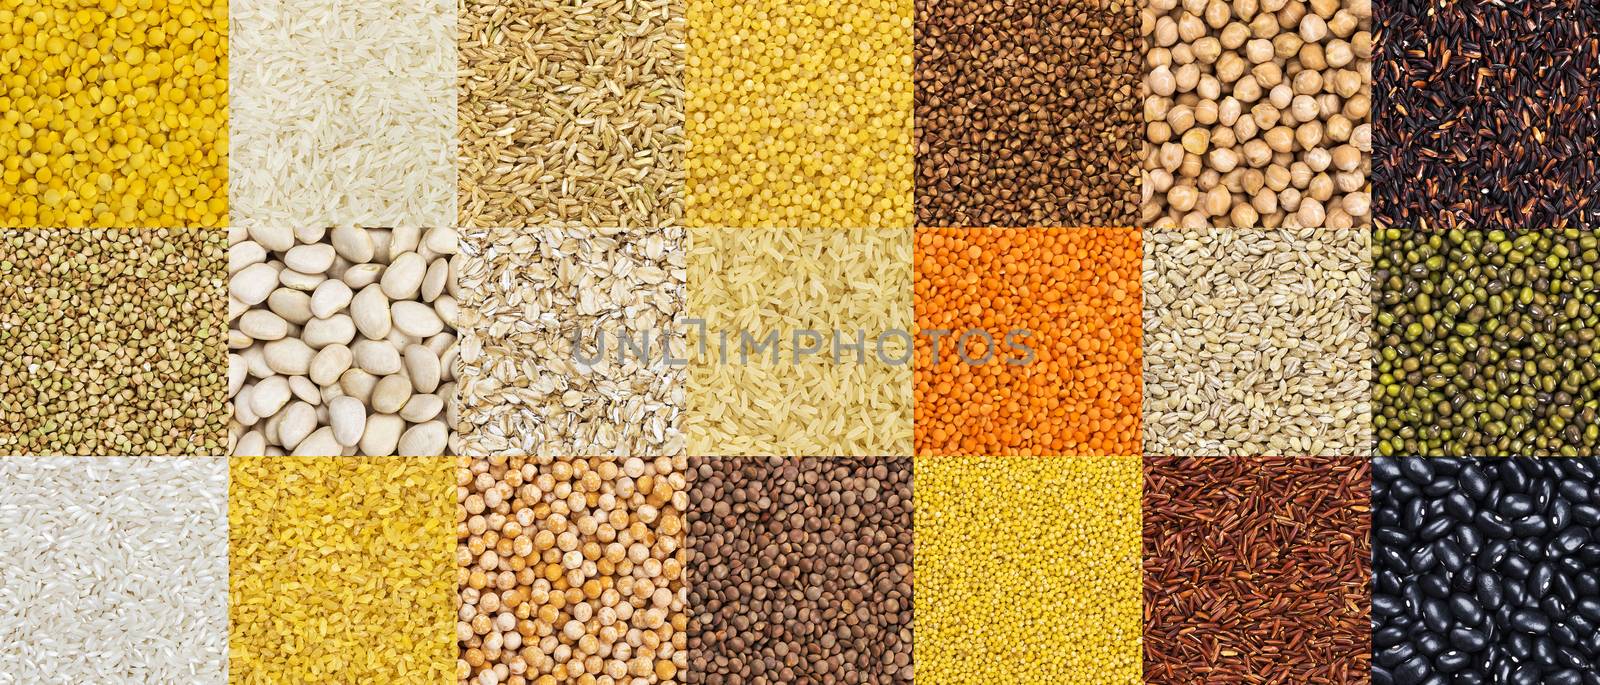 Pattern of different cereals, grains, rice and beans backgrounds by xamtiw